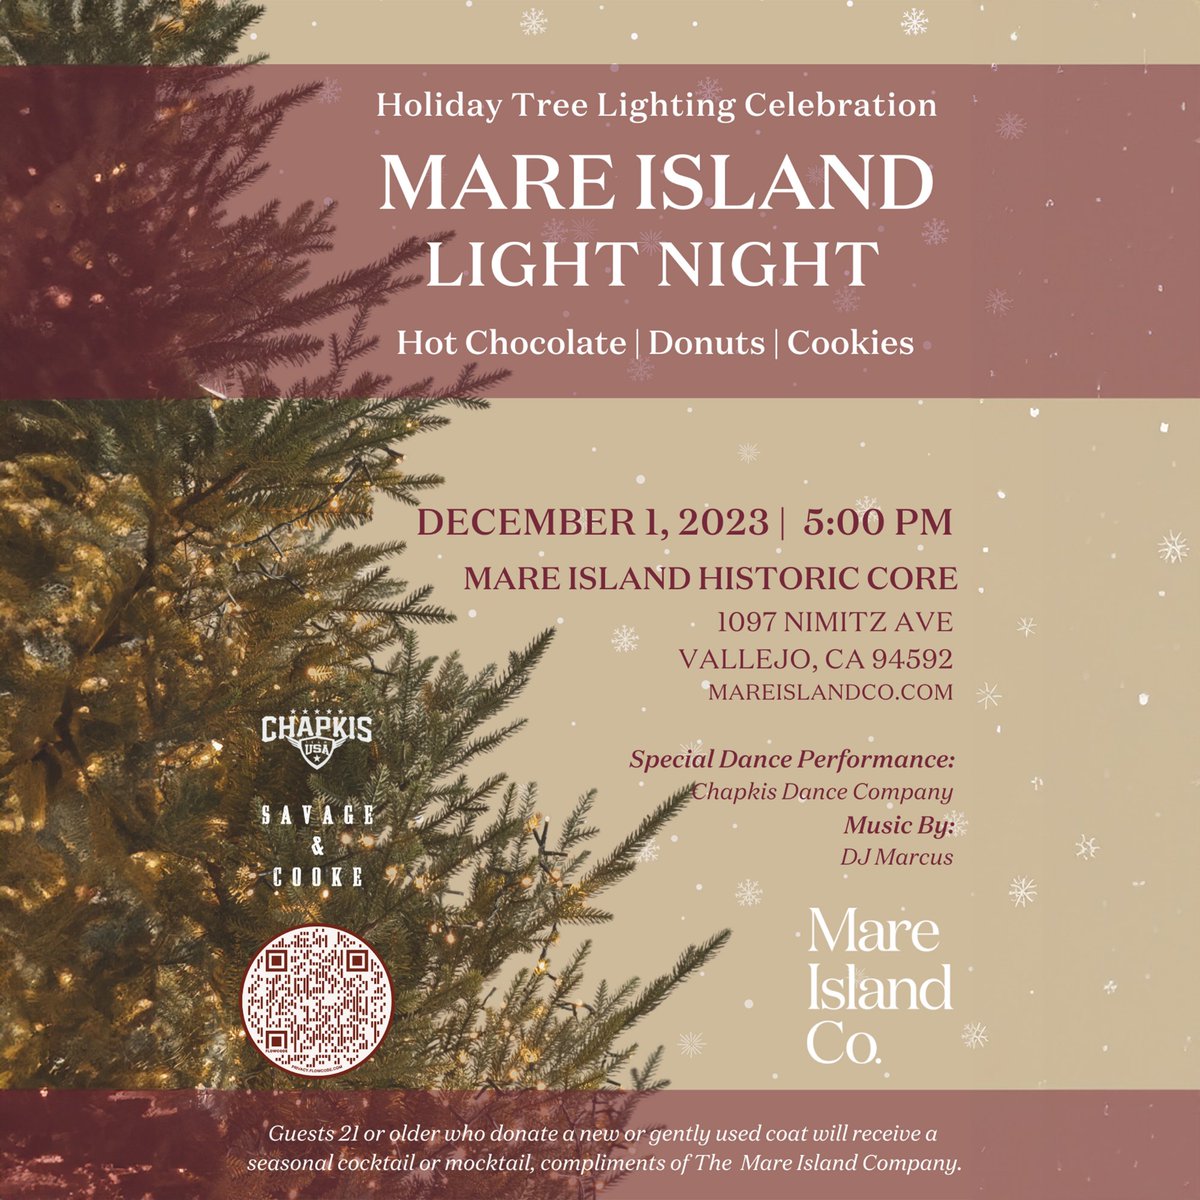 Join us under the twinkling lights at Mare Island Historic Core for a magical Holiday Tree Lighting Celebration TONIGHT! Let the festive spirit illuminate the historic surroundings at 1097 Nimitz Ave, Vallejo, CA 94592.